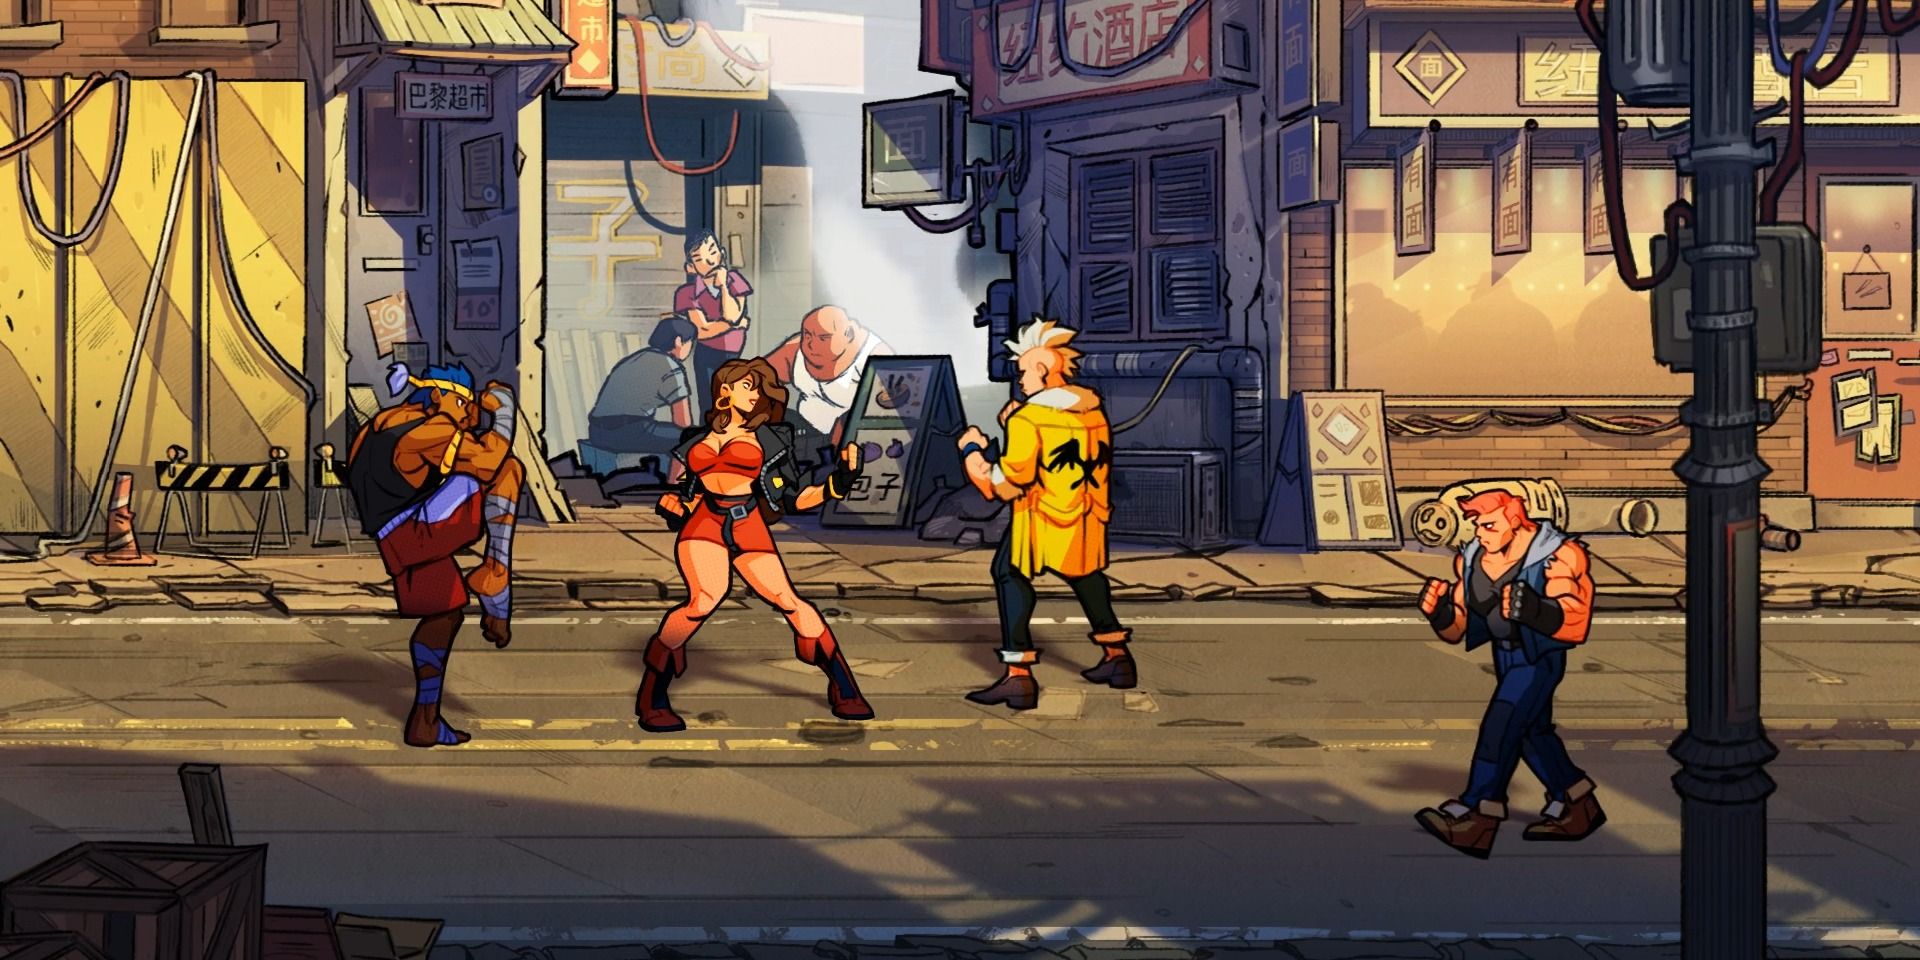 A screenshot showing gameplay from Streets of Rage 4